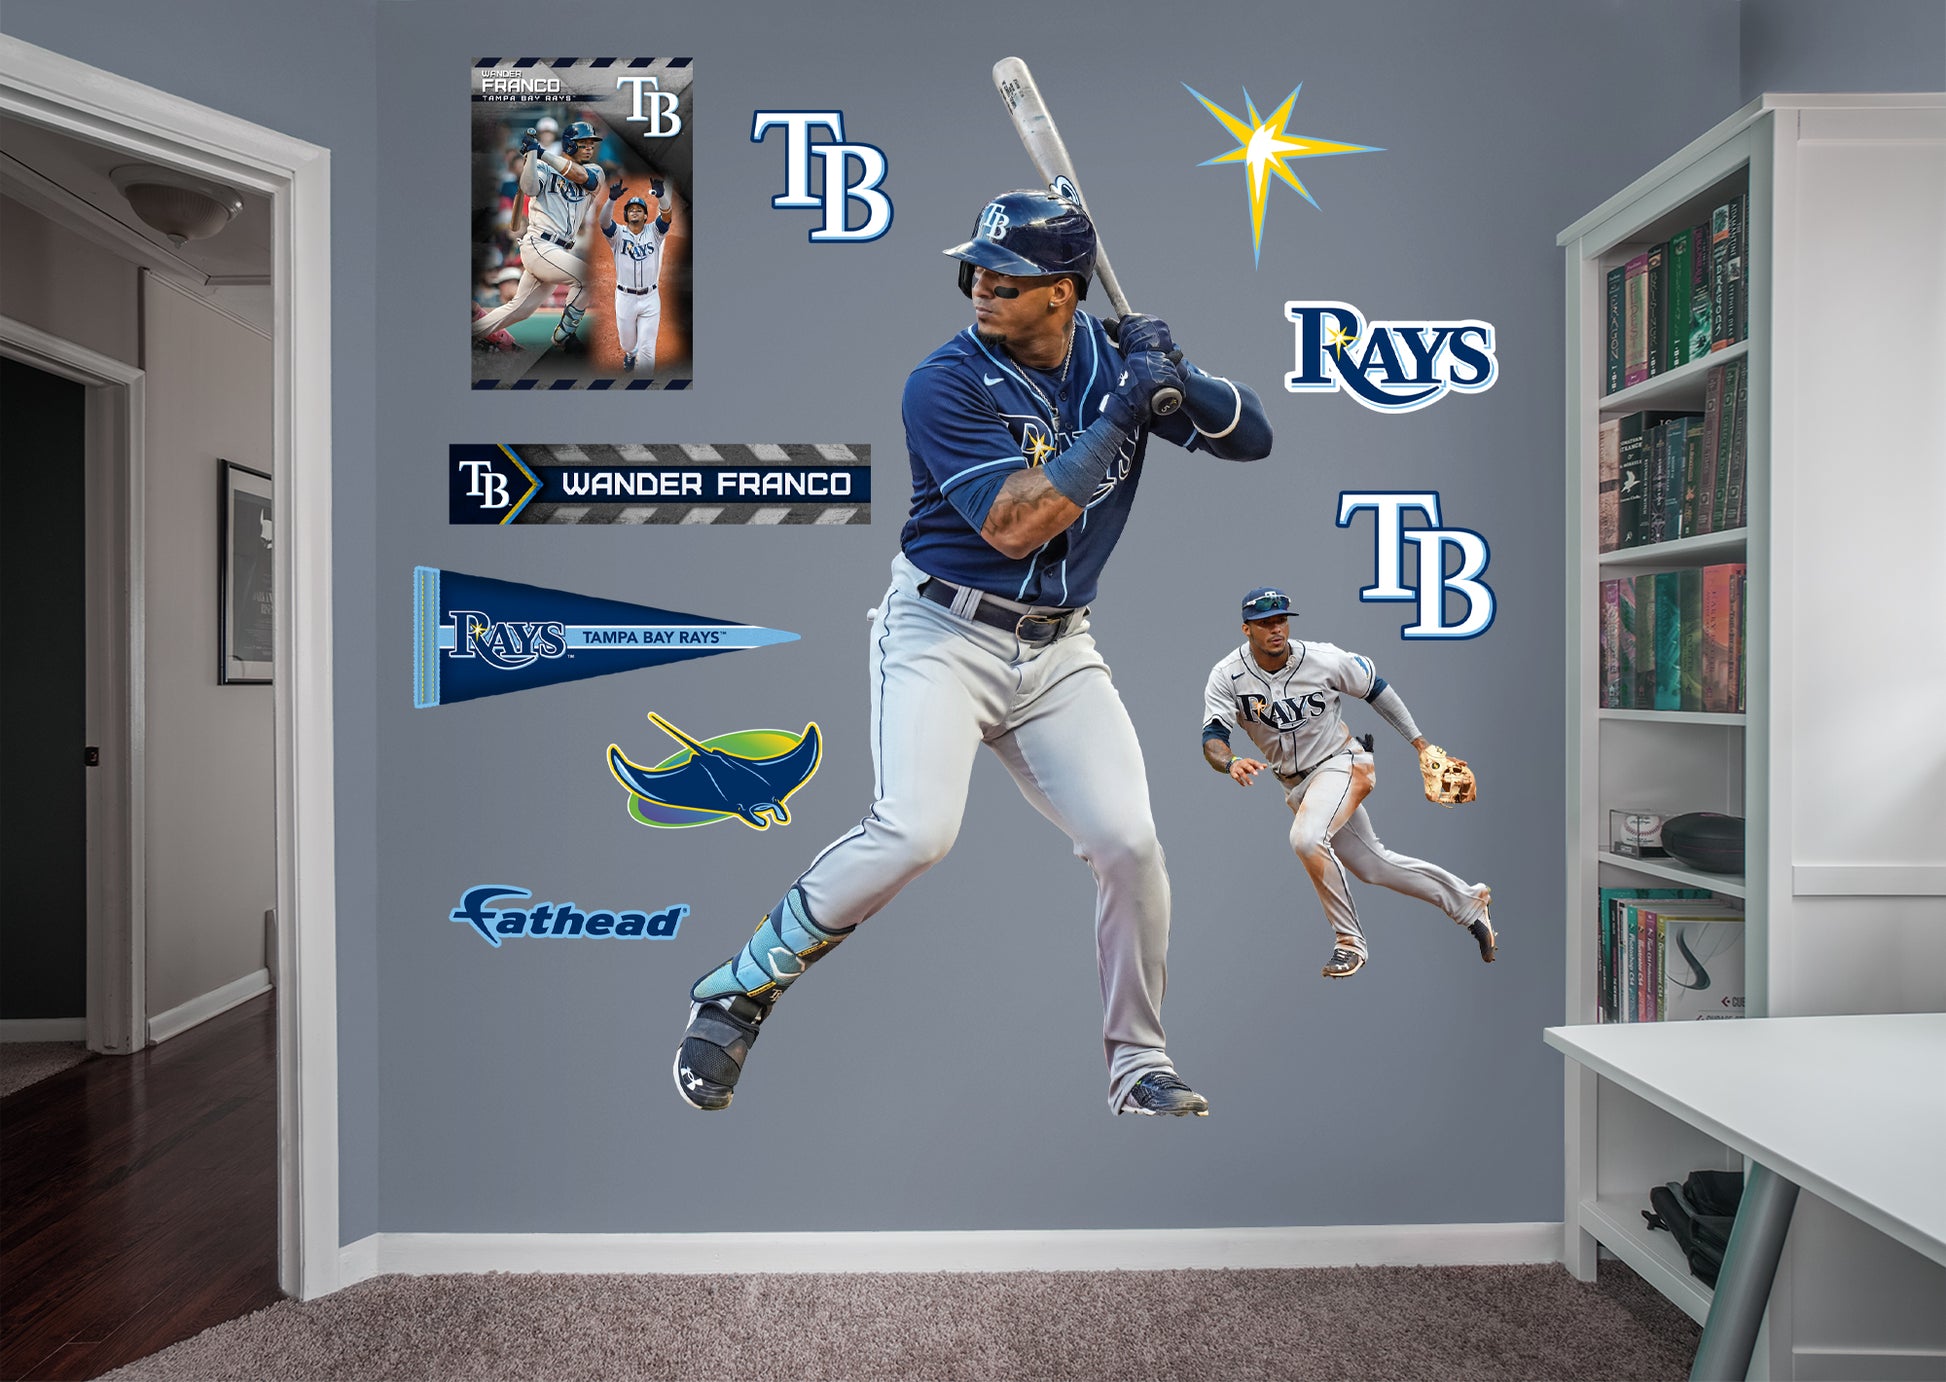 Tampa Bay Rays: Wander Franco 2021 - MLB Removable Adhesive Wall Decal Giant Athlete +2 Wall Decals 26'W x 51'H